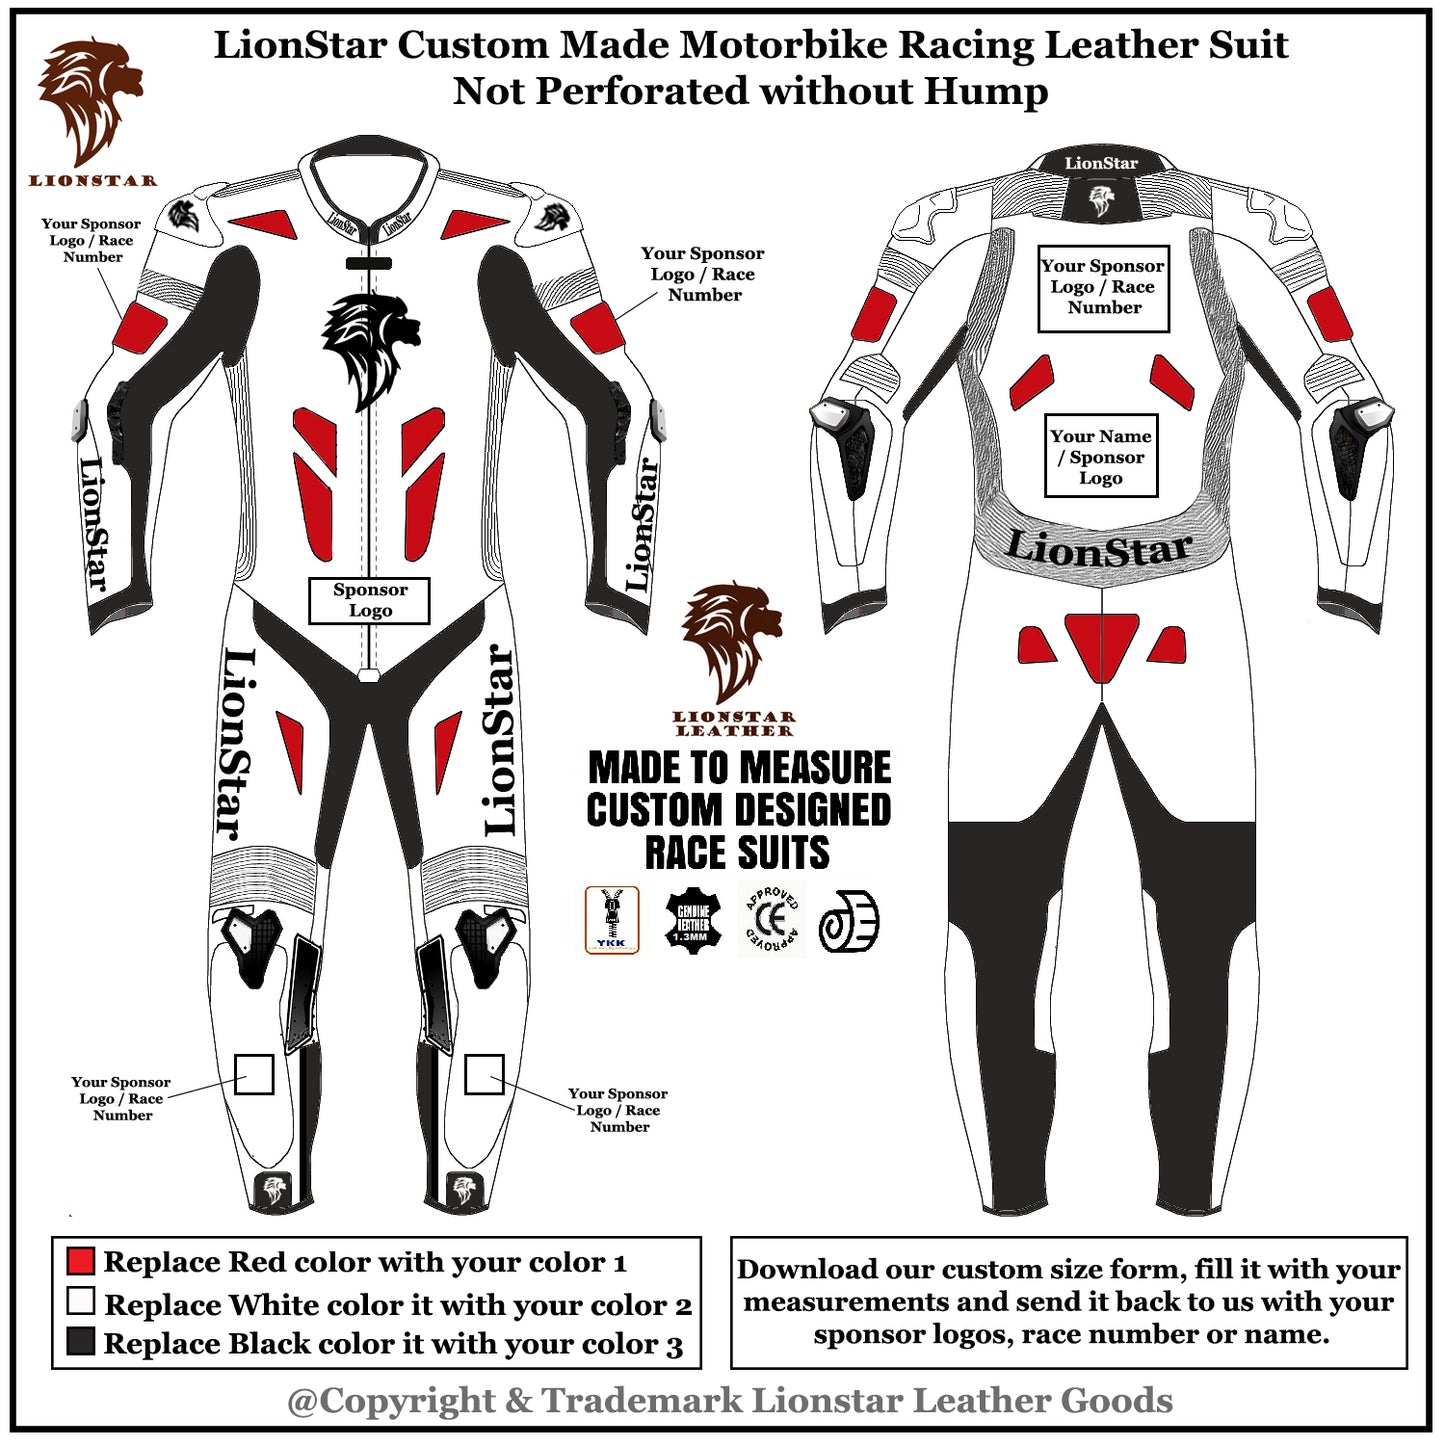 Custom Racing Suit without hump not perforated